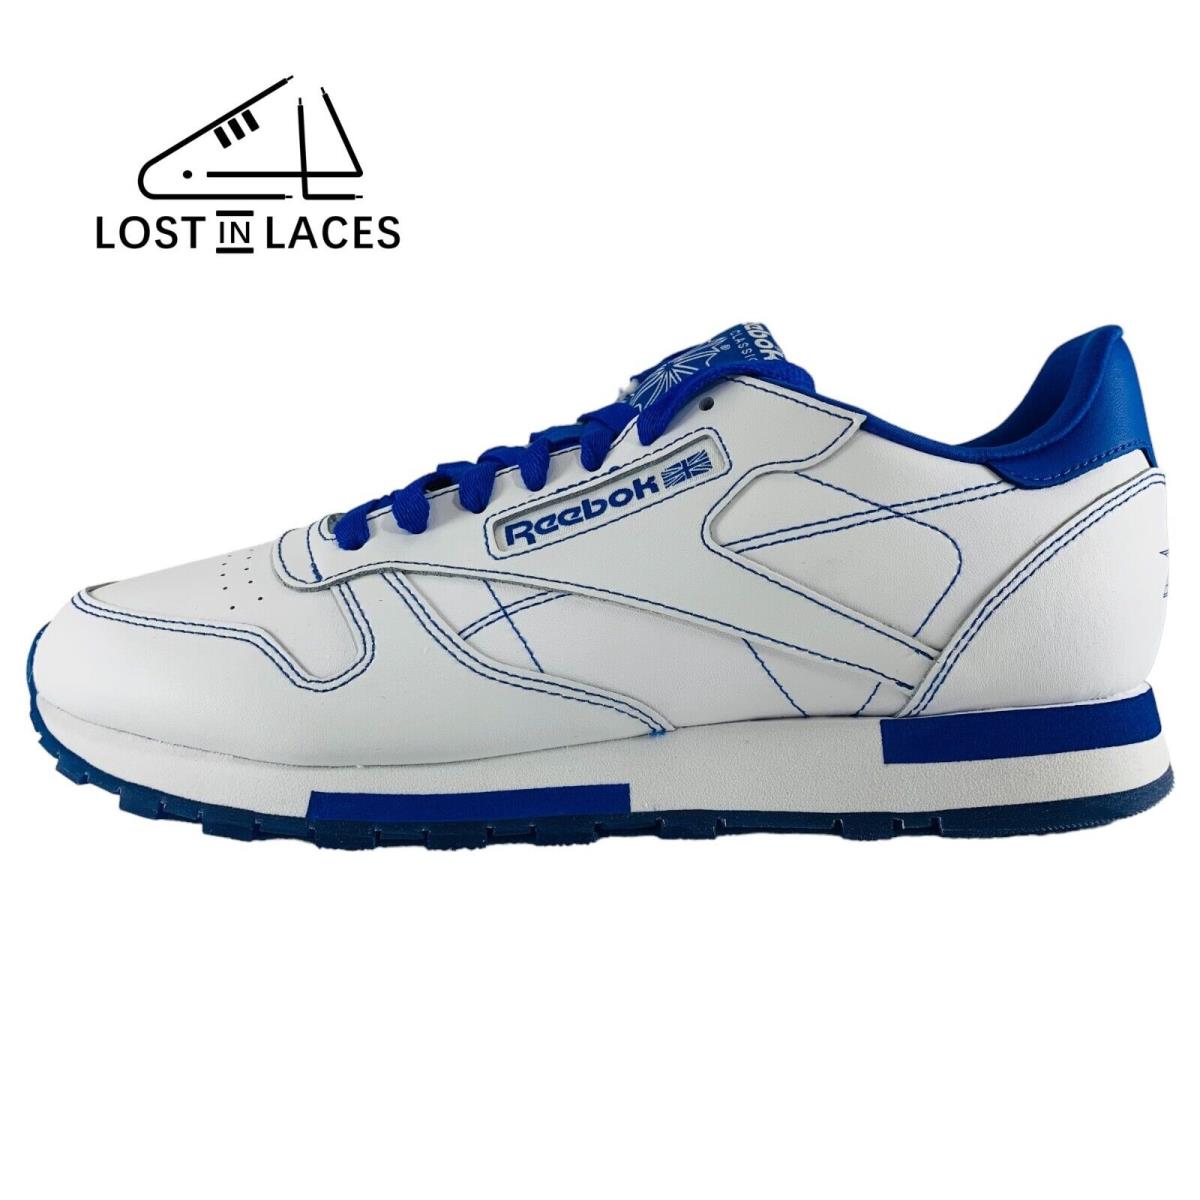 Buy Reebok Men Blue and White Mesh Running Shoes (Size 12) at Amazon.in